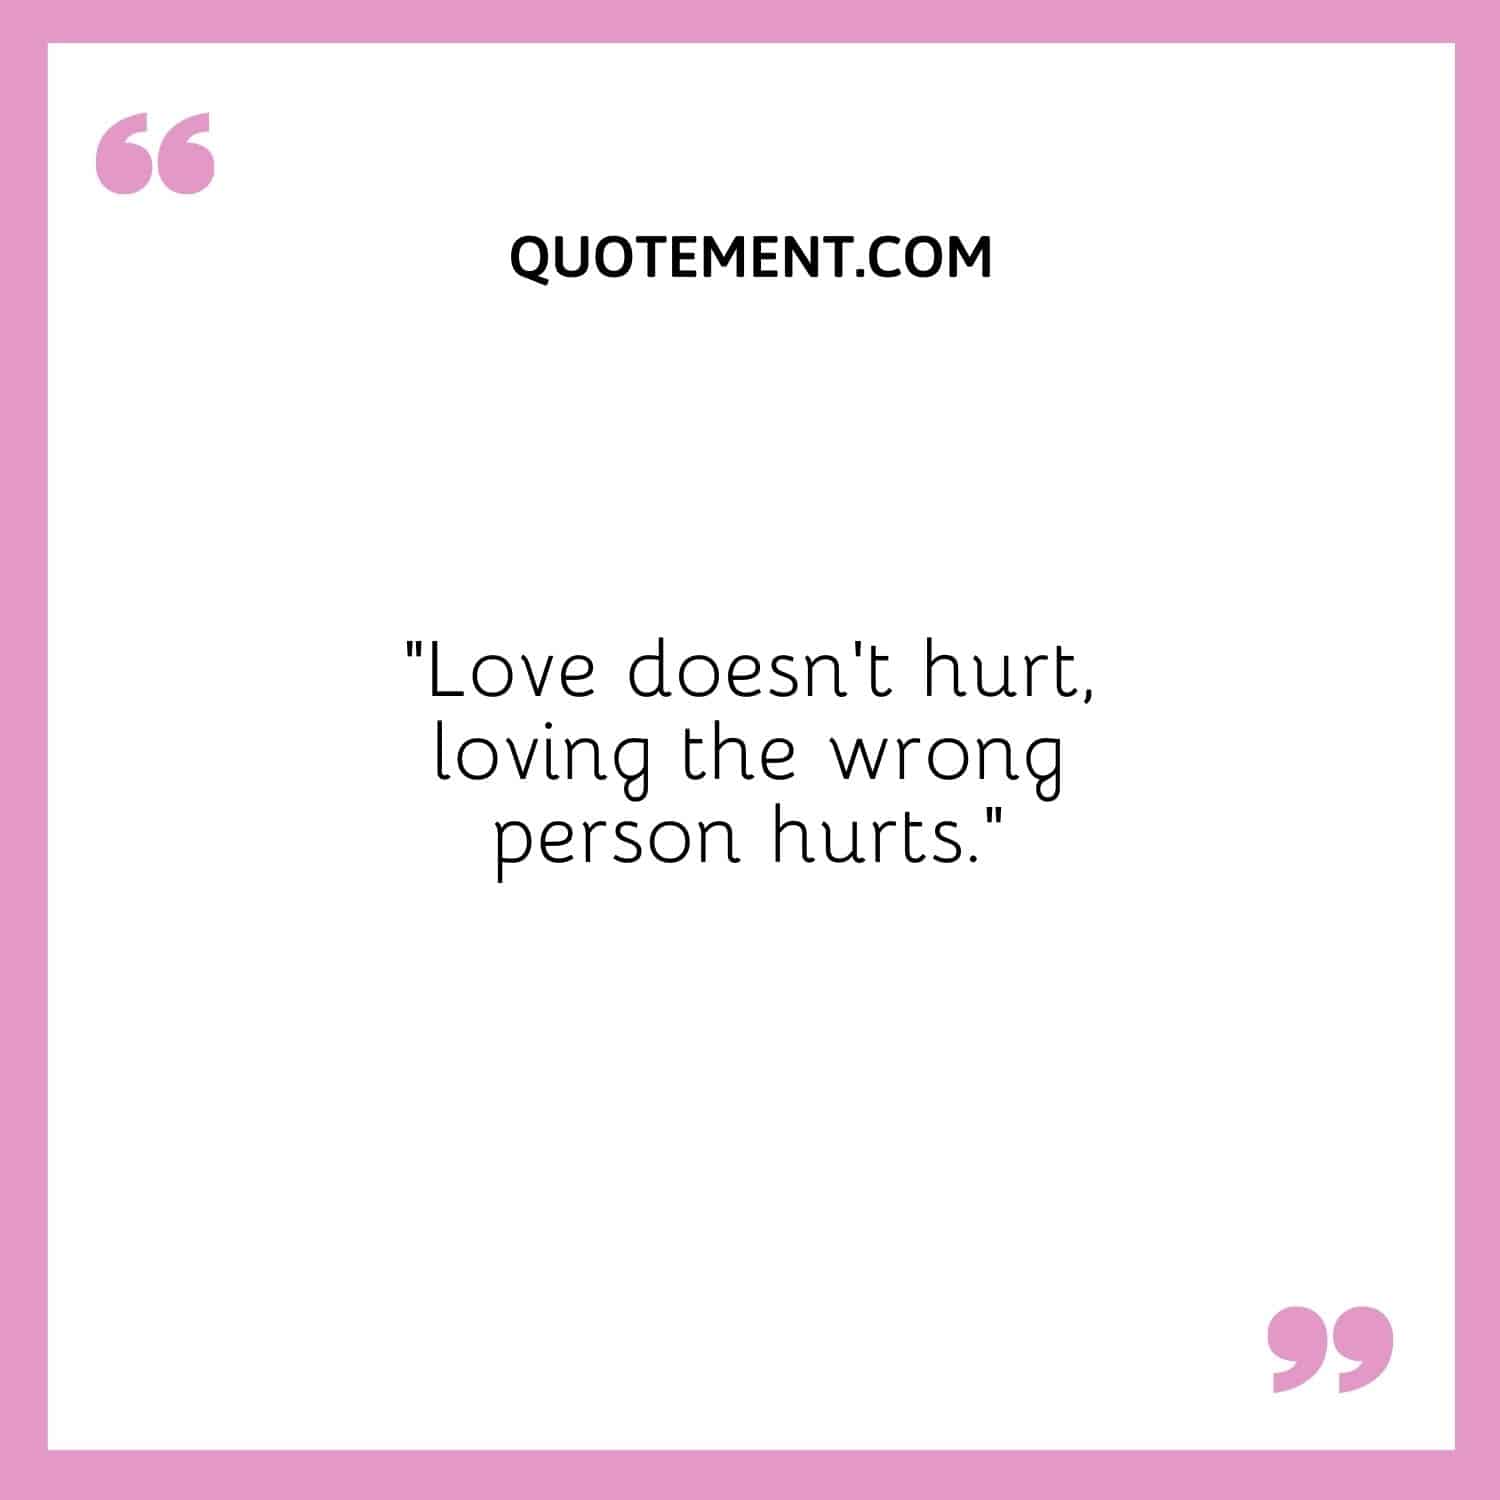 Love doesn’t hurt, loving the wrong person hurts.